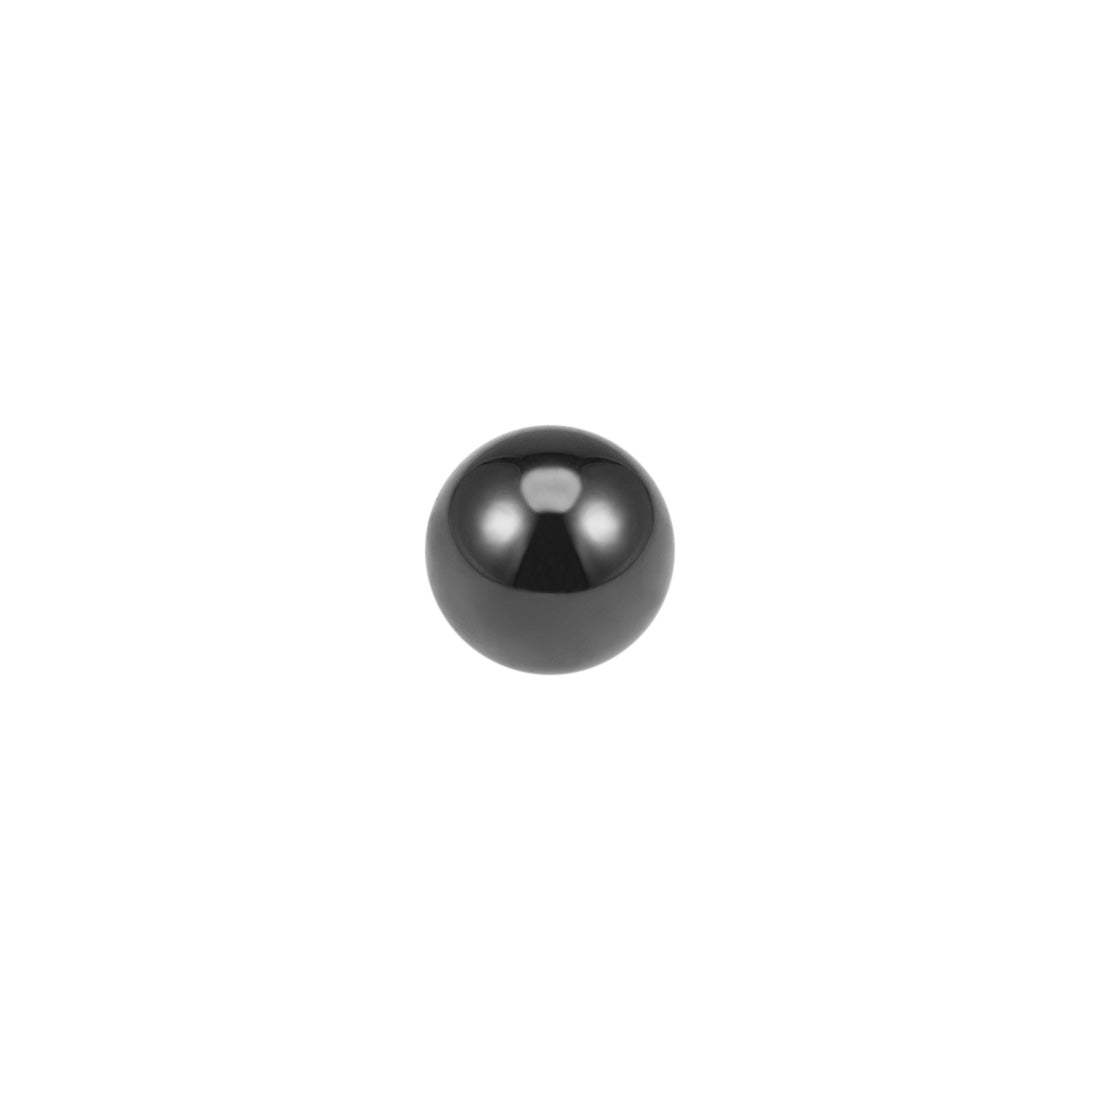 uxcell Uxcell Bearing Balls Inch Silicon Nitride G5 Precision Balls